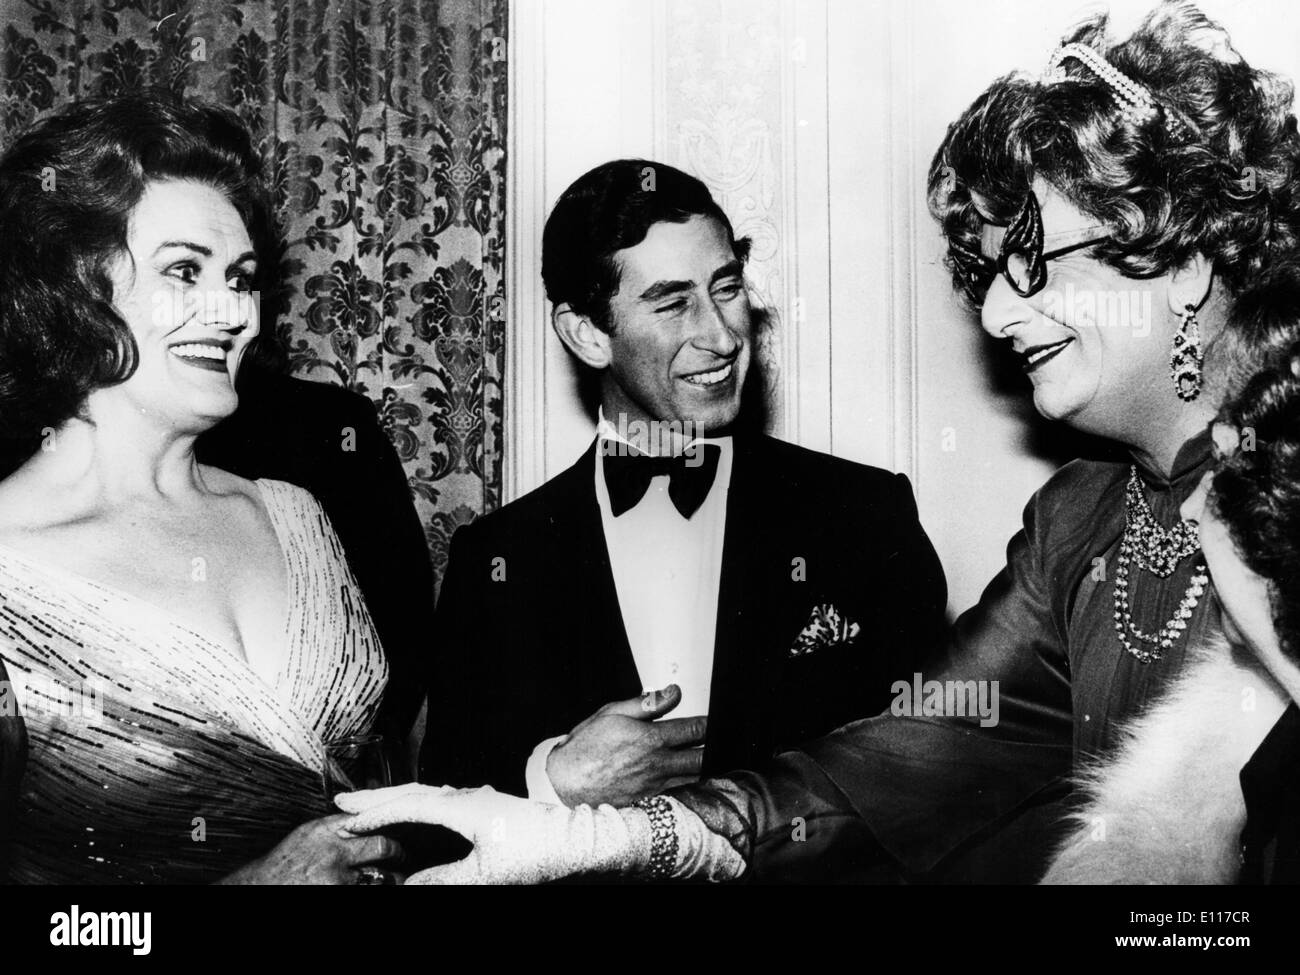 Prince Charles chats with Joan Sutherland at party Stock Photo